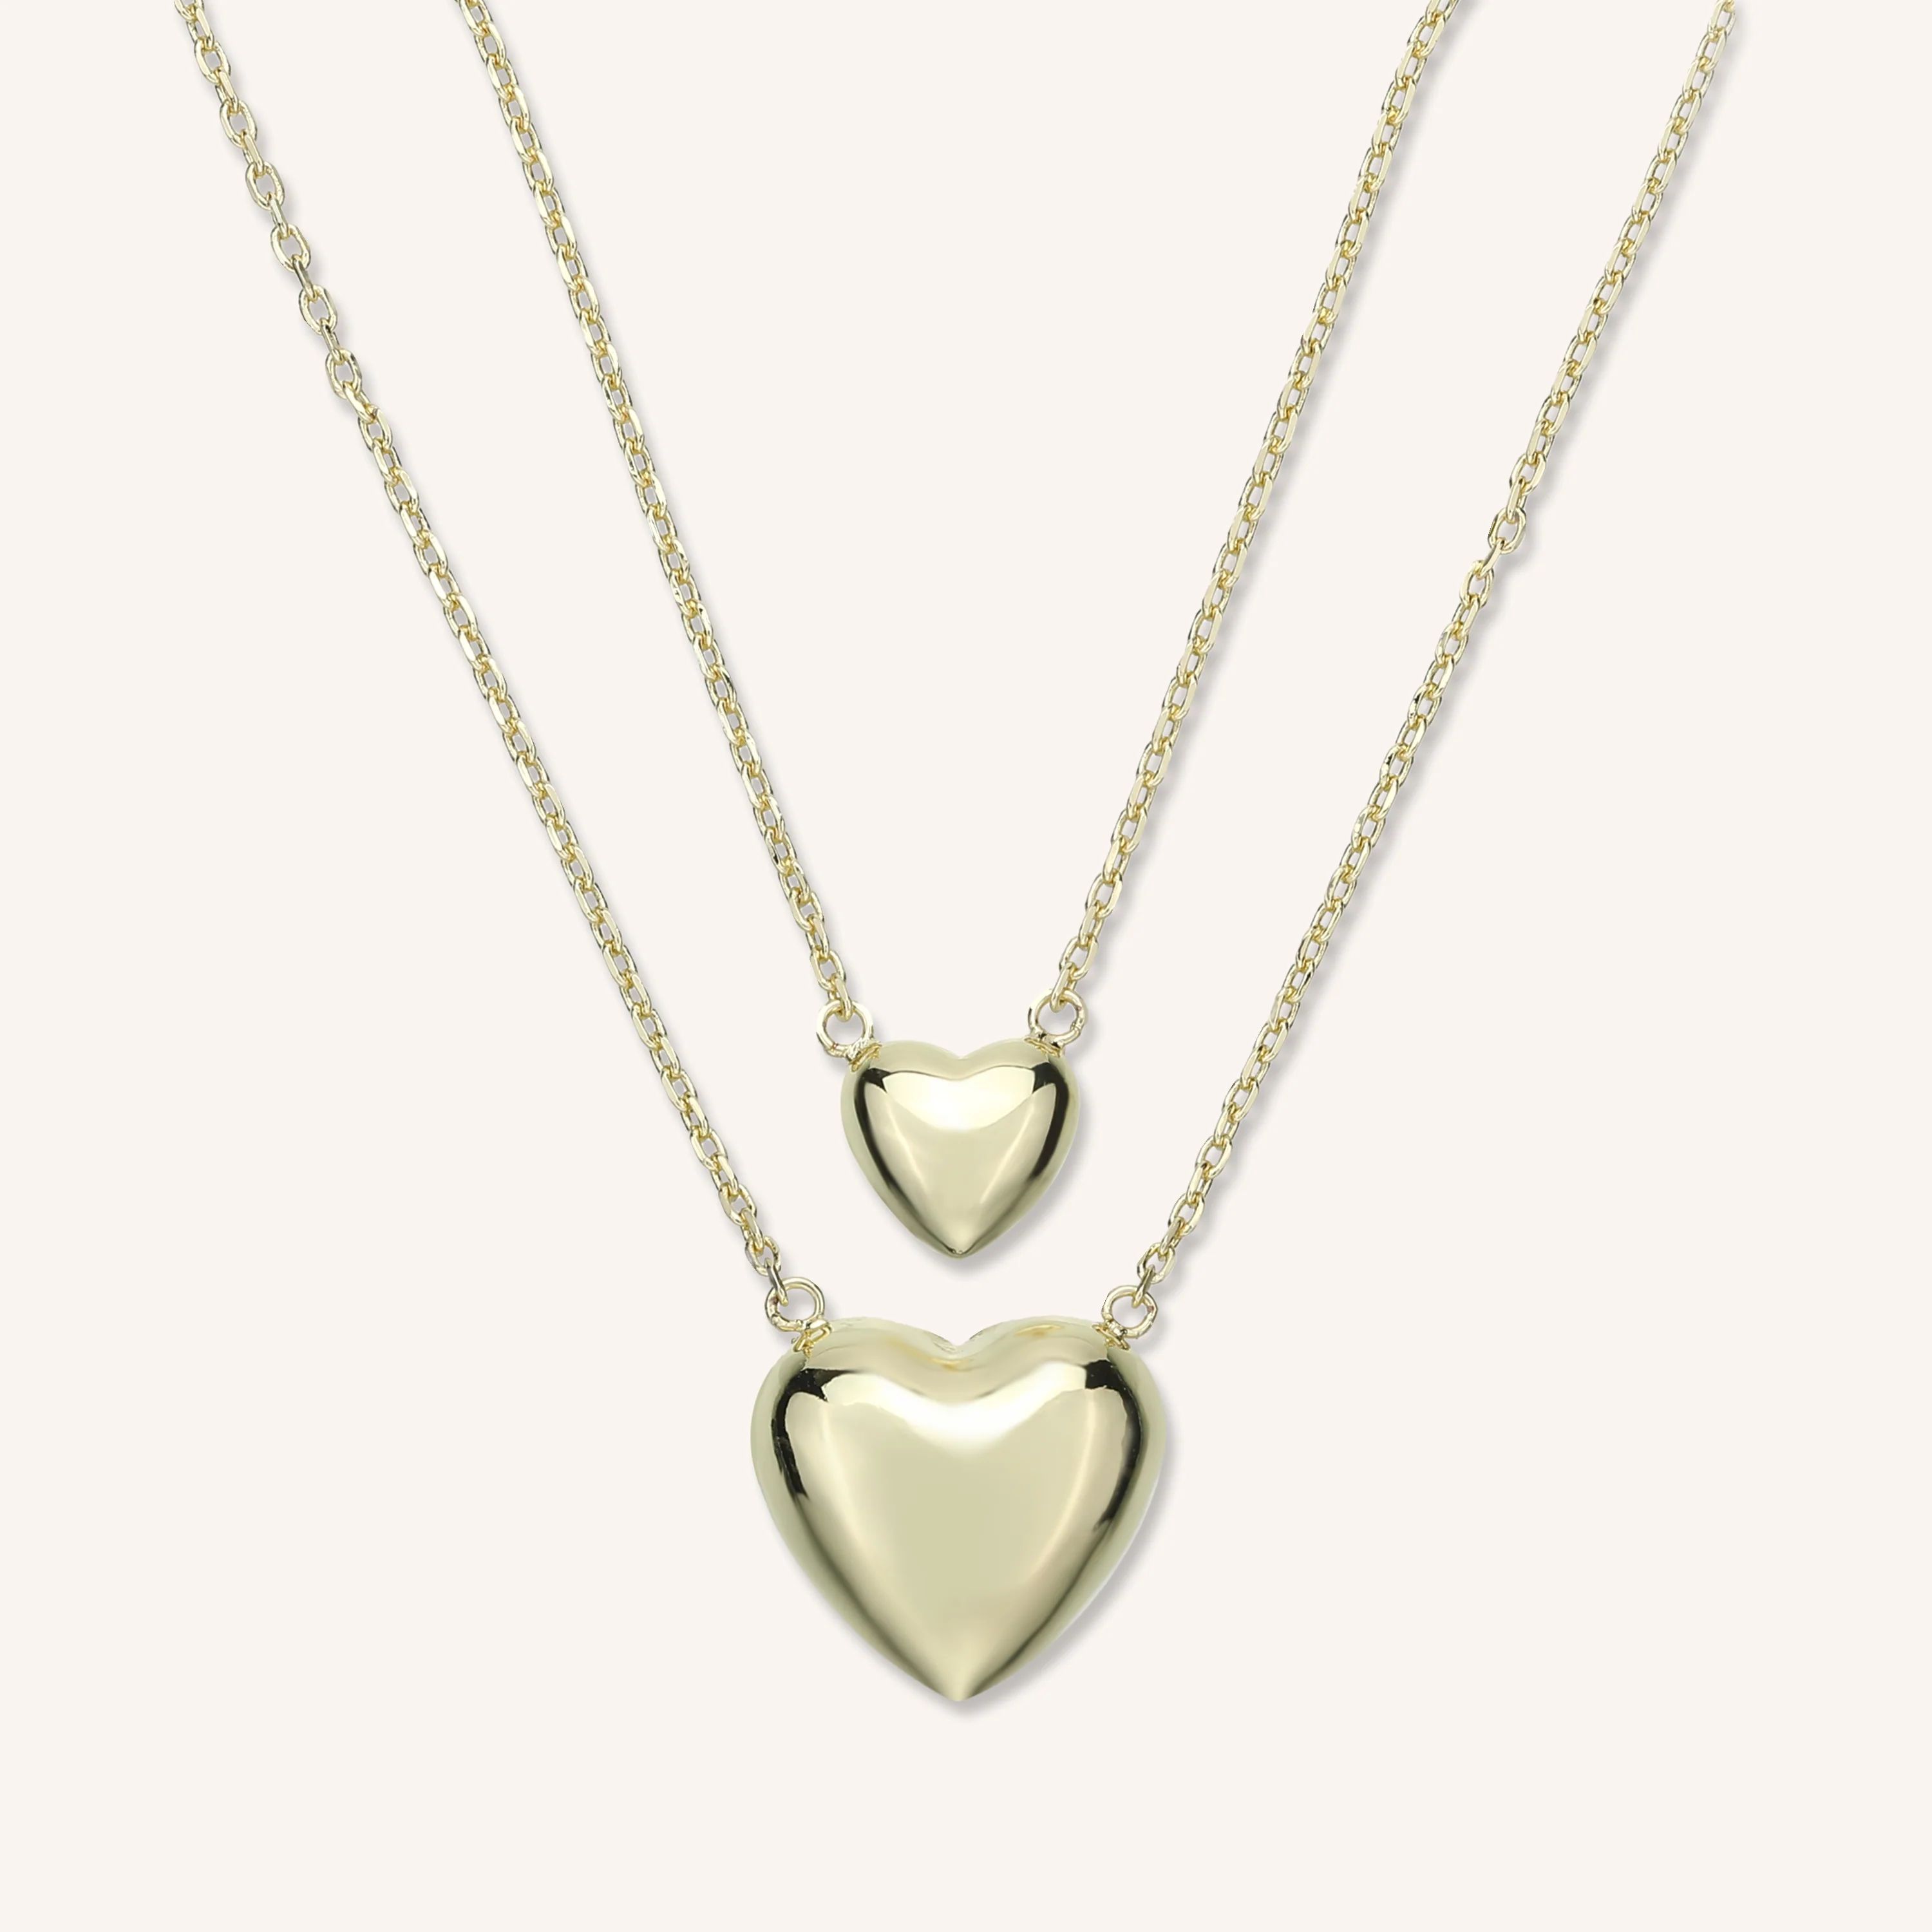 Heart of Gold Necklace Set | Victoria Emerson